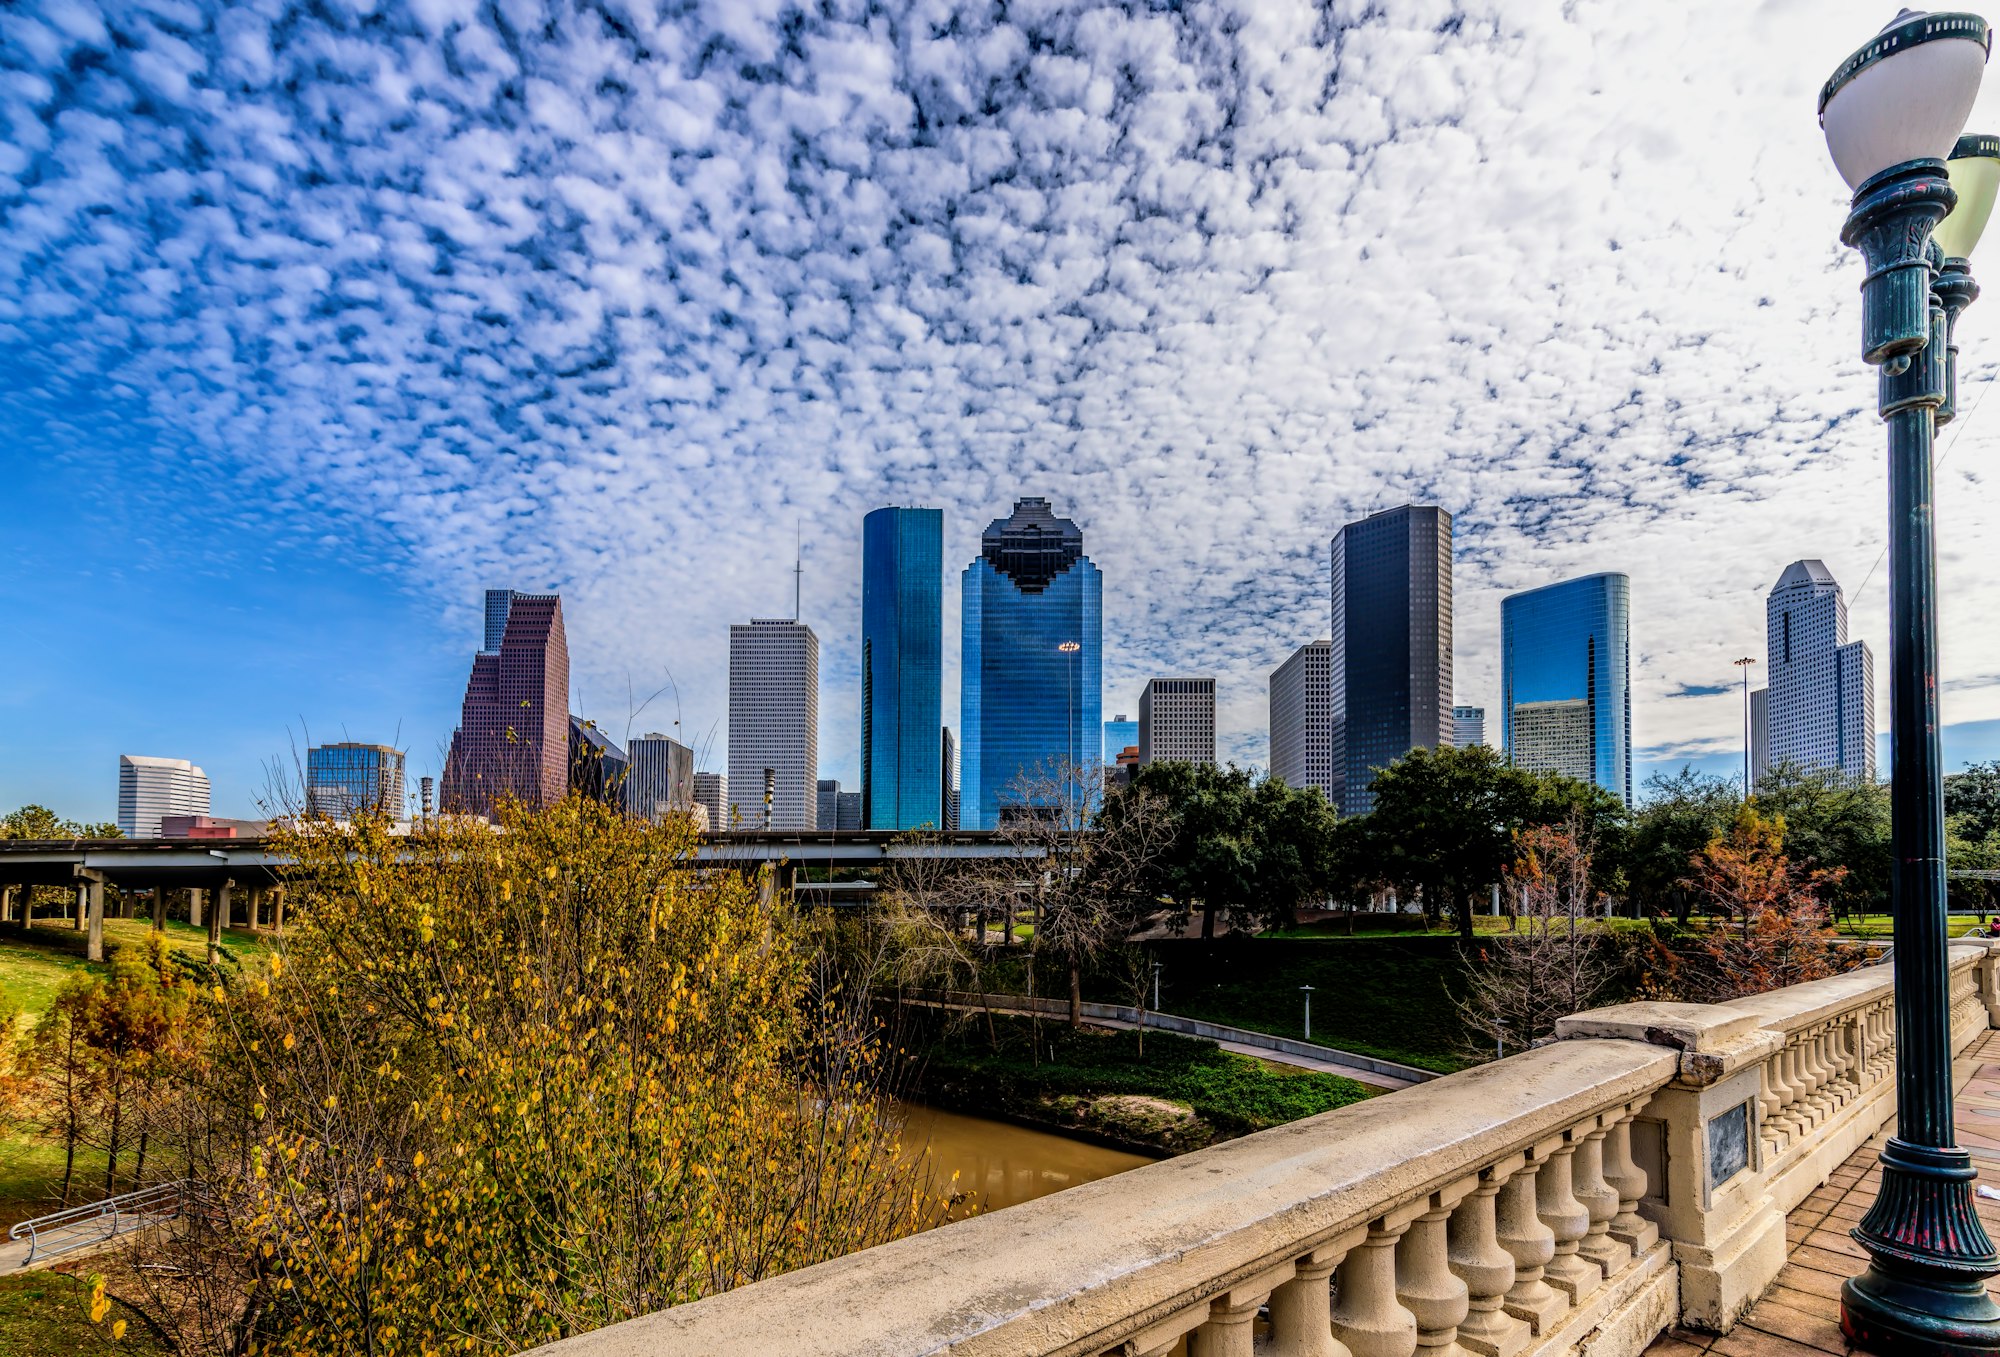 What to do in Houston, Texas in three days?